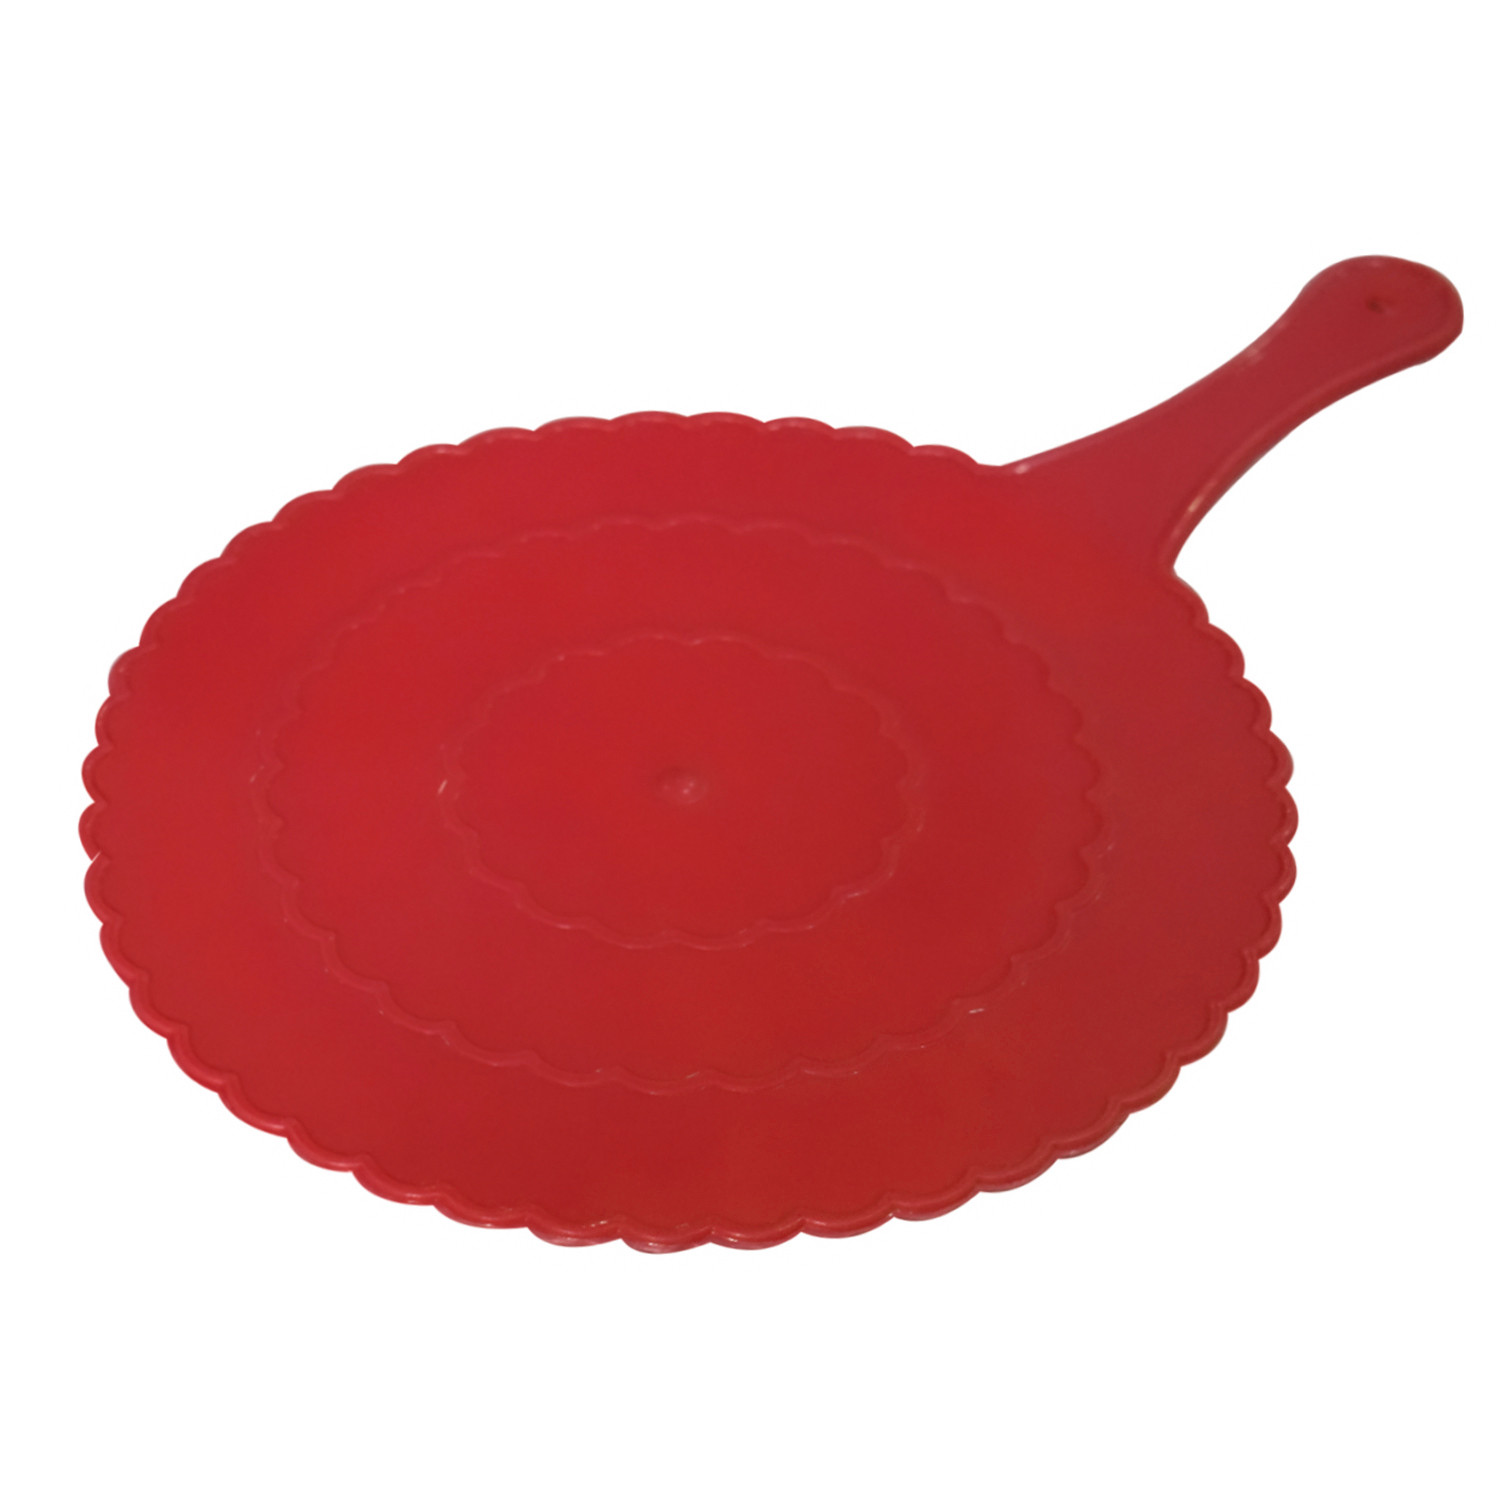 Kuber Industries Plastic Lightweight Handfan|Hath Pankha|Beejna for Natural Cooling Air Home Decor and Travel Useful,(Red)